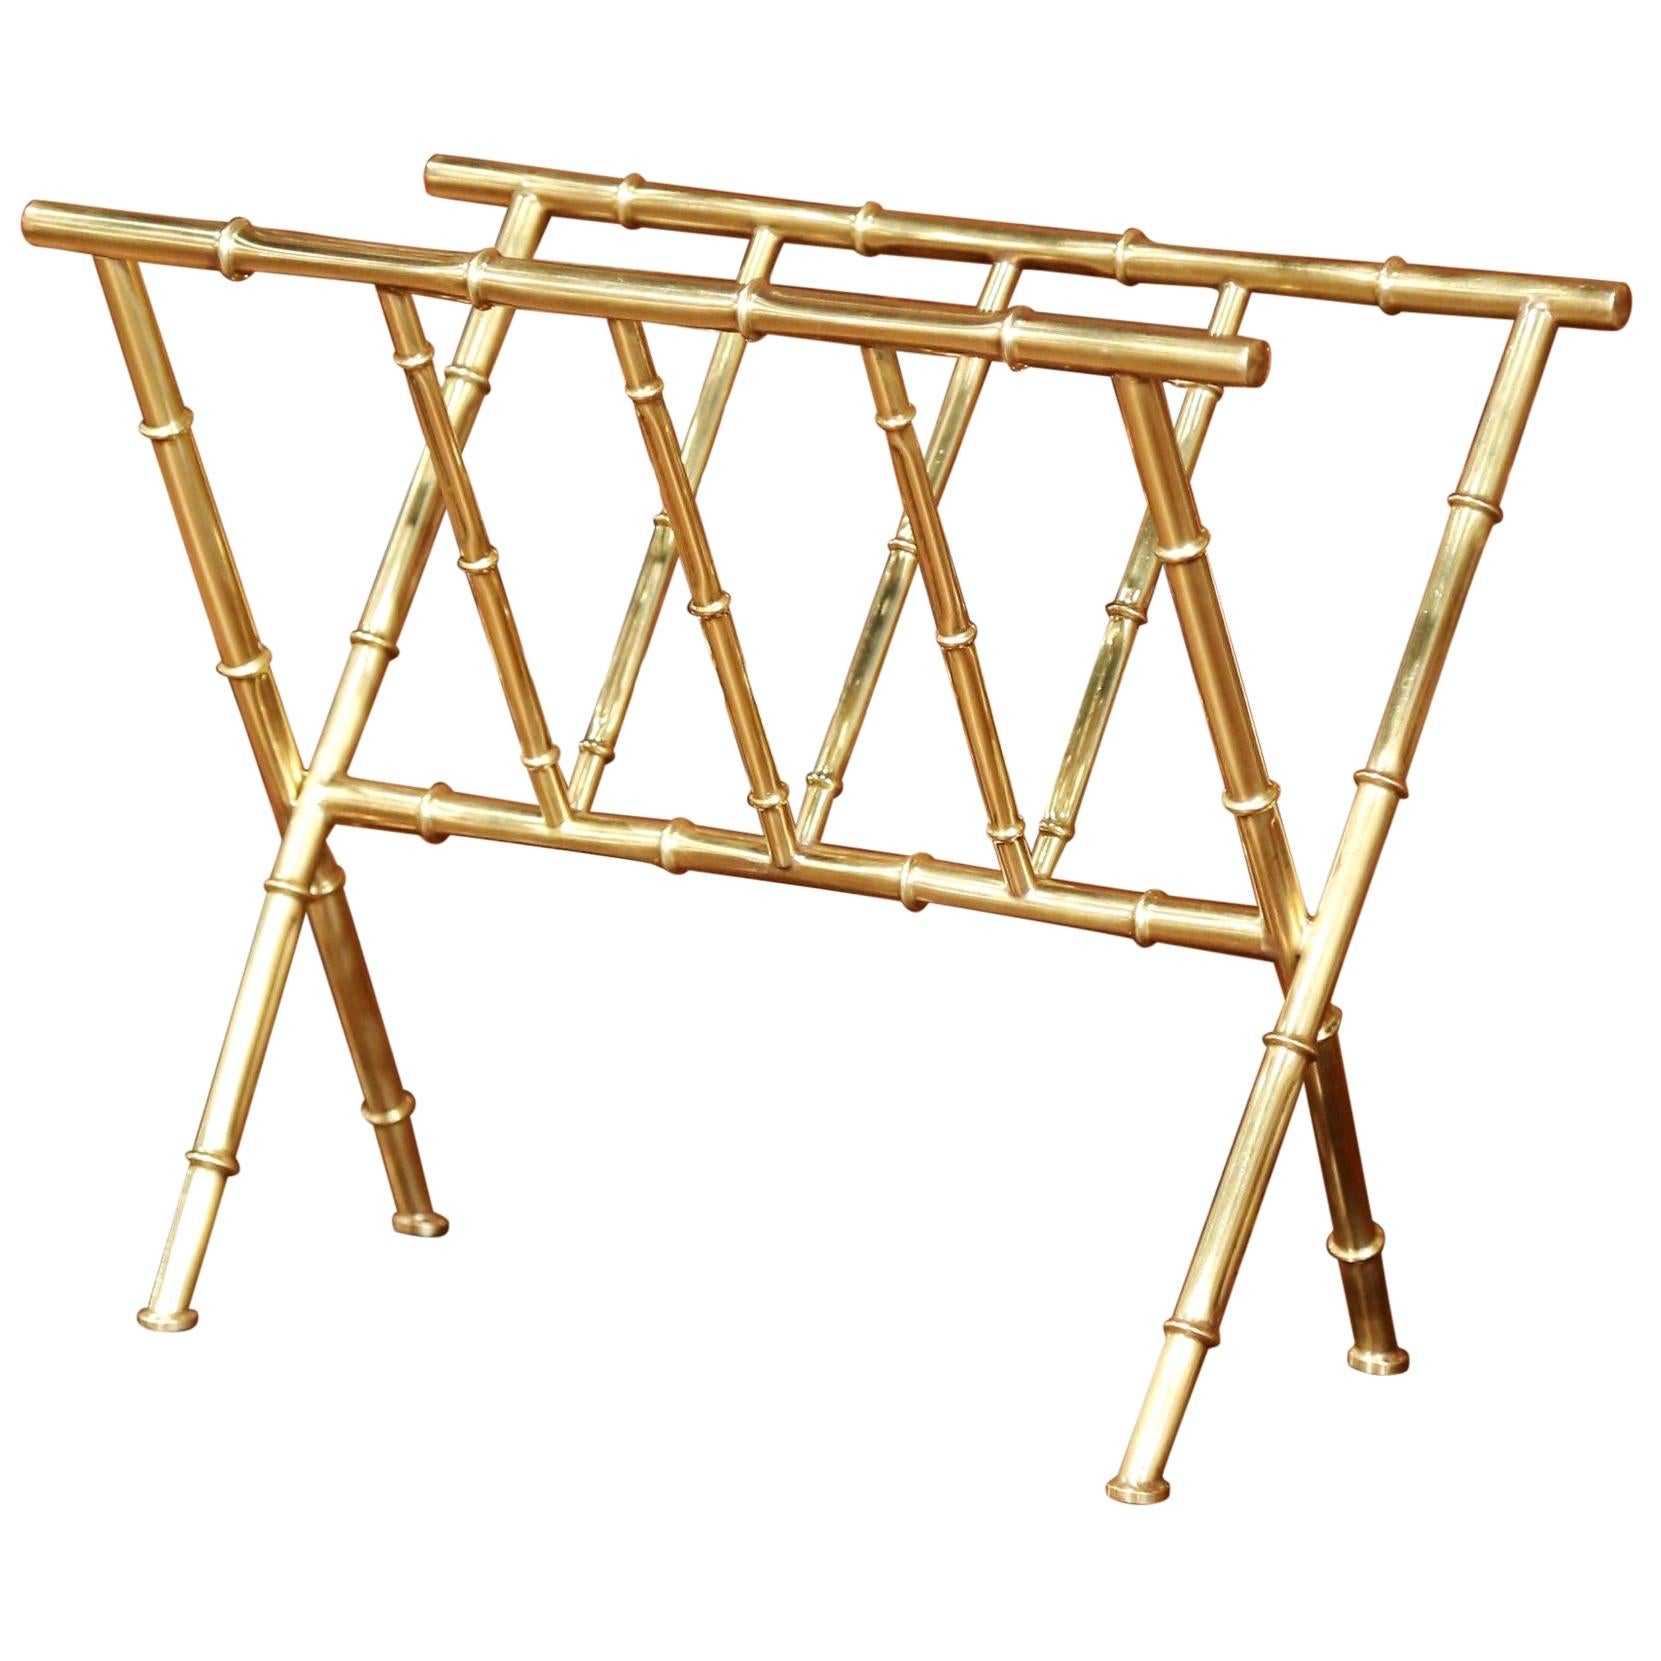 Mid-20th Century French Bamboo Brass Magazine Rack from Maison Baguès, Paris